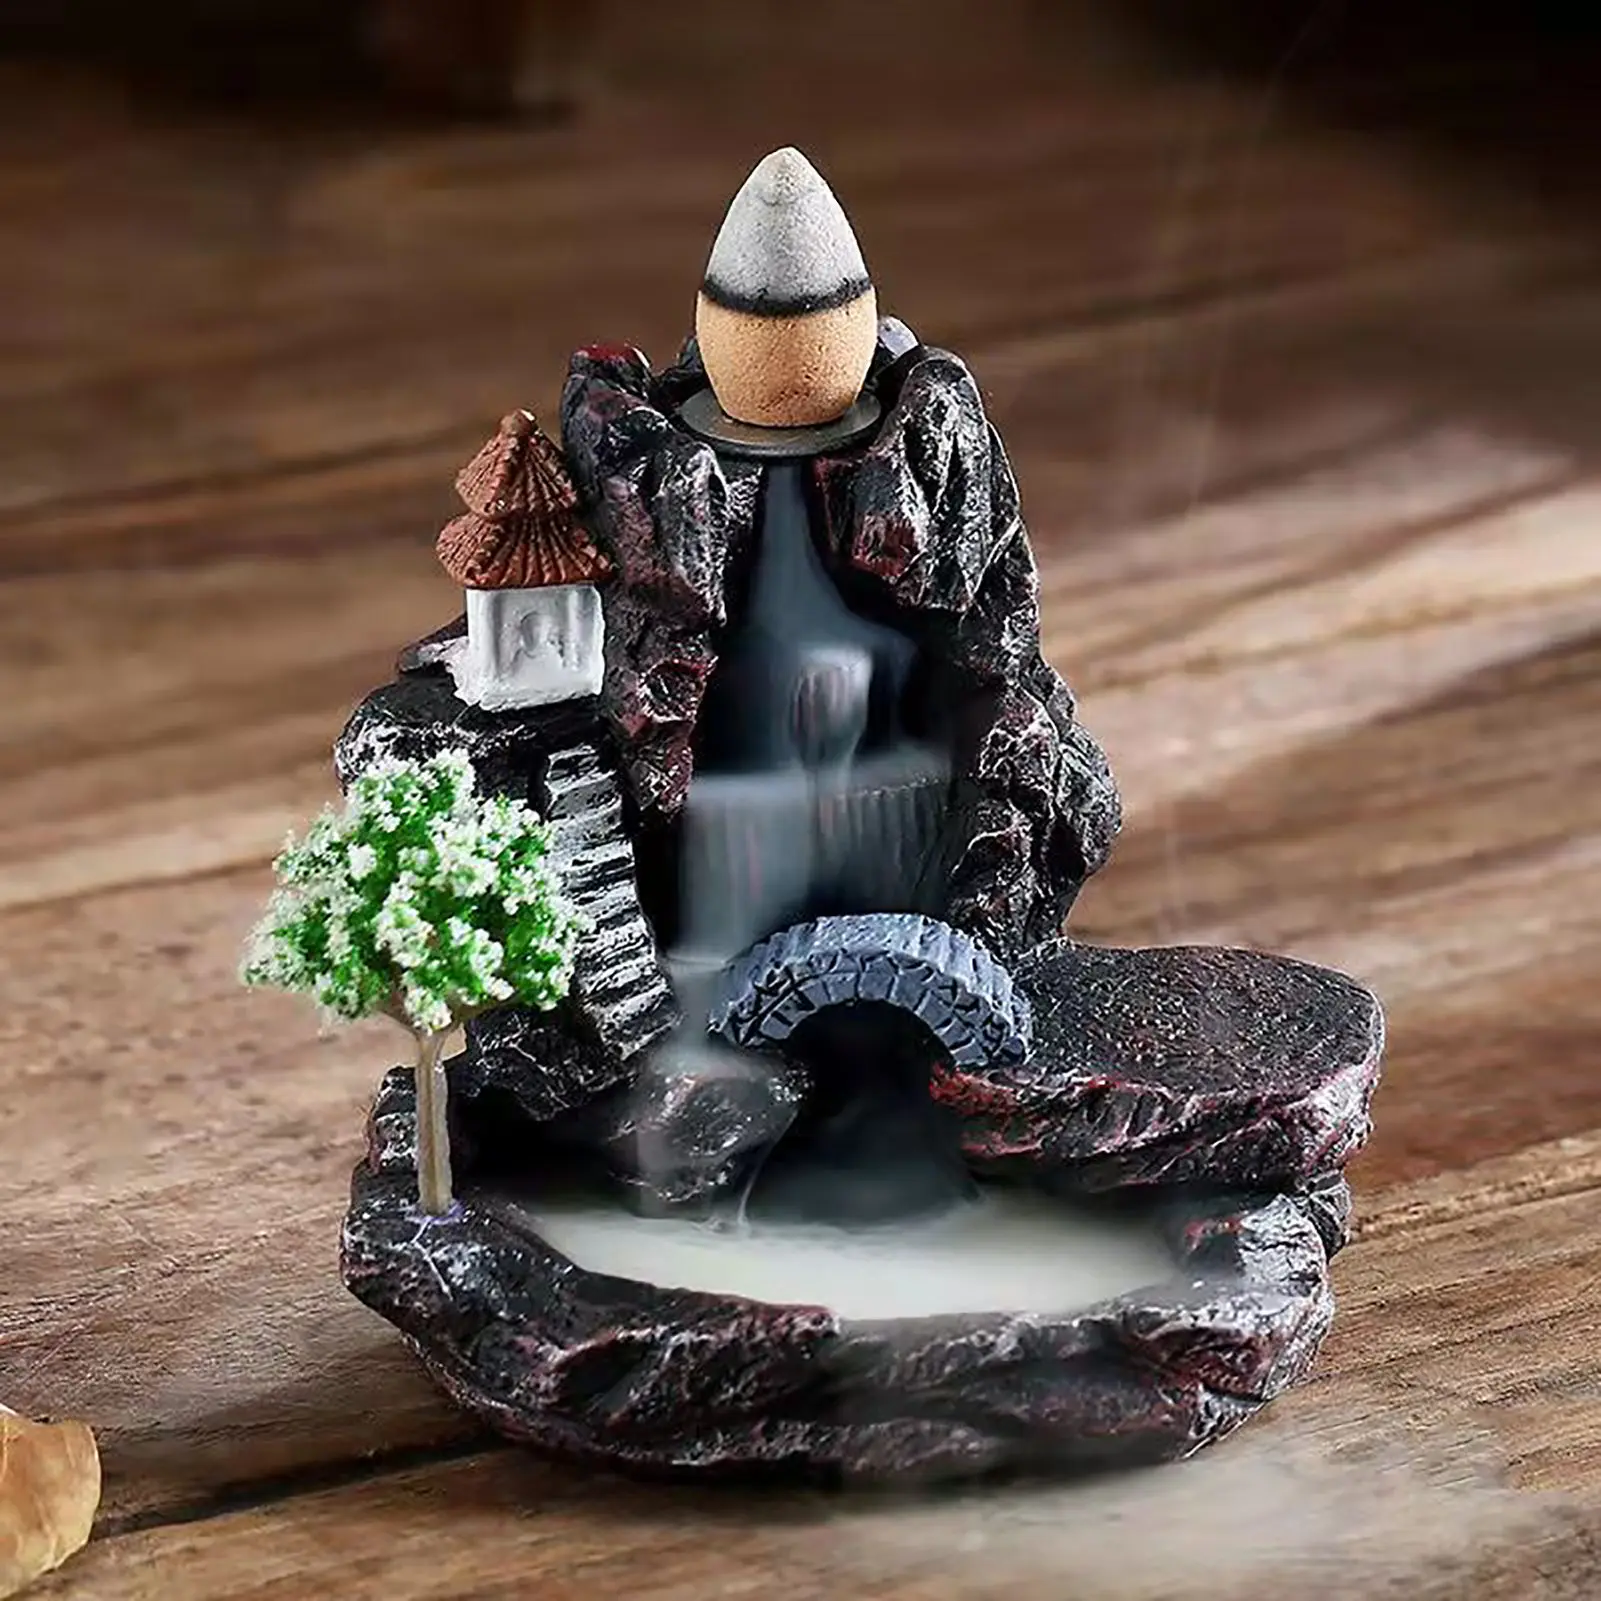 Waterfall Incense Burner Ceramic Backflow Incense Holder Fountain Backflow Incense Cones For Home Office Decor Housewarming Gift